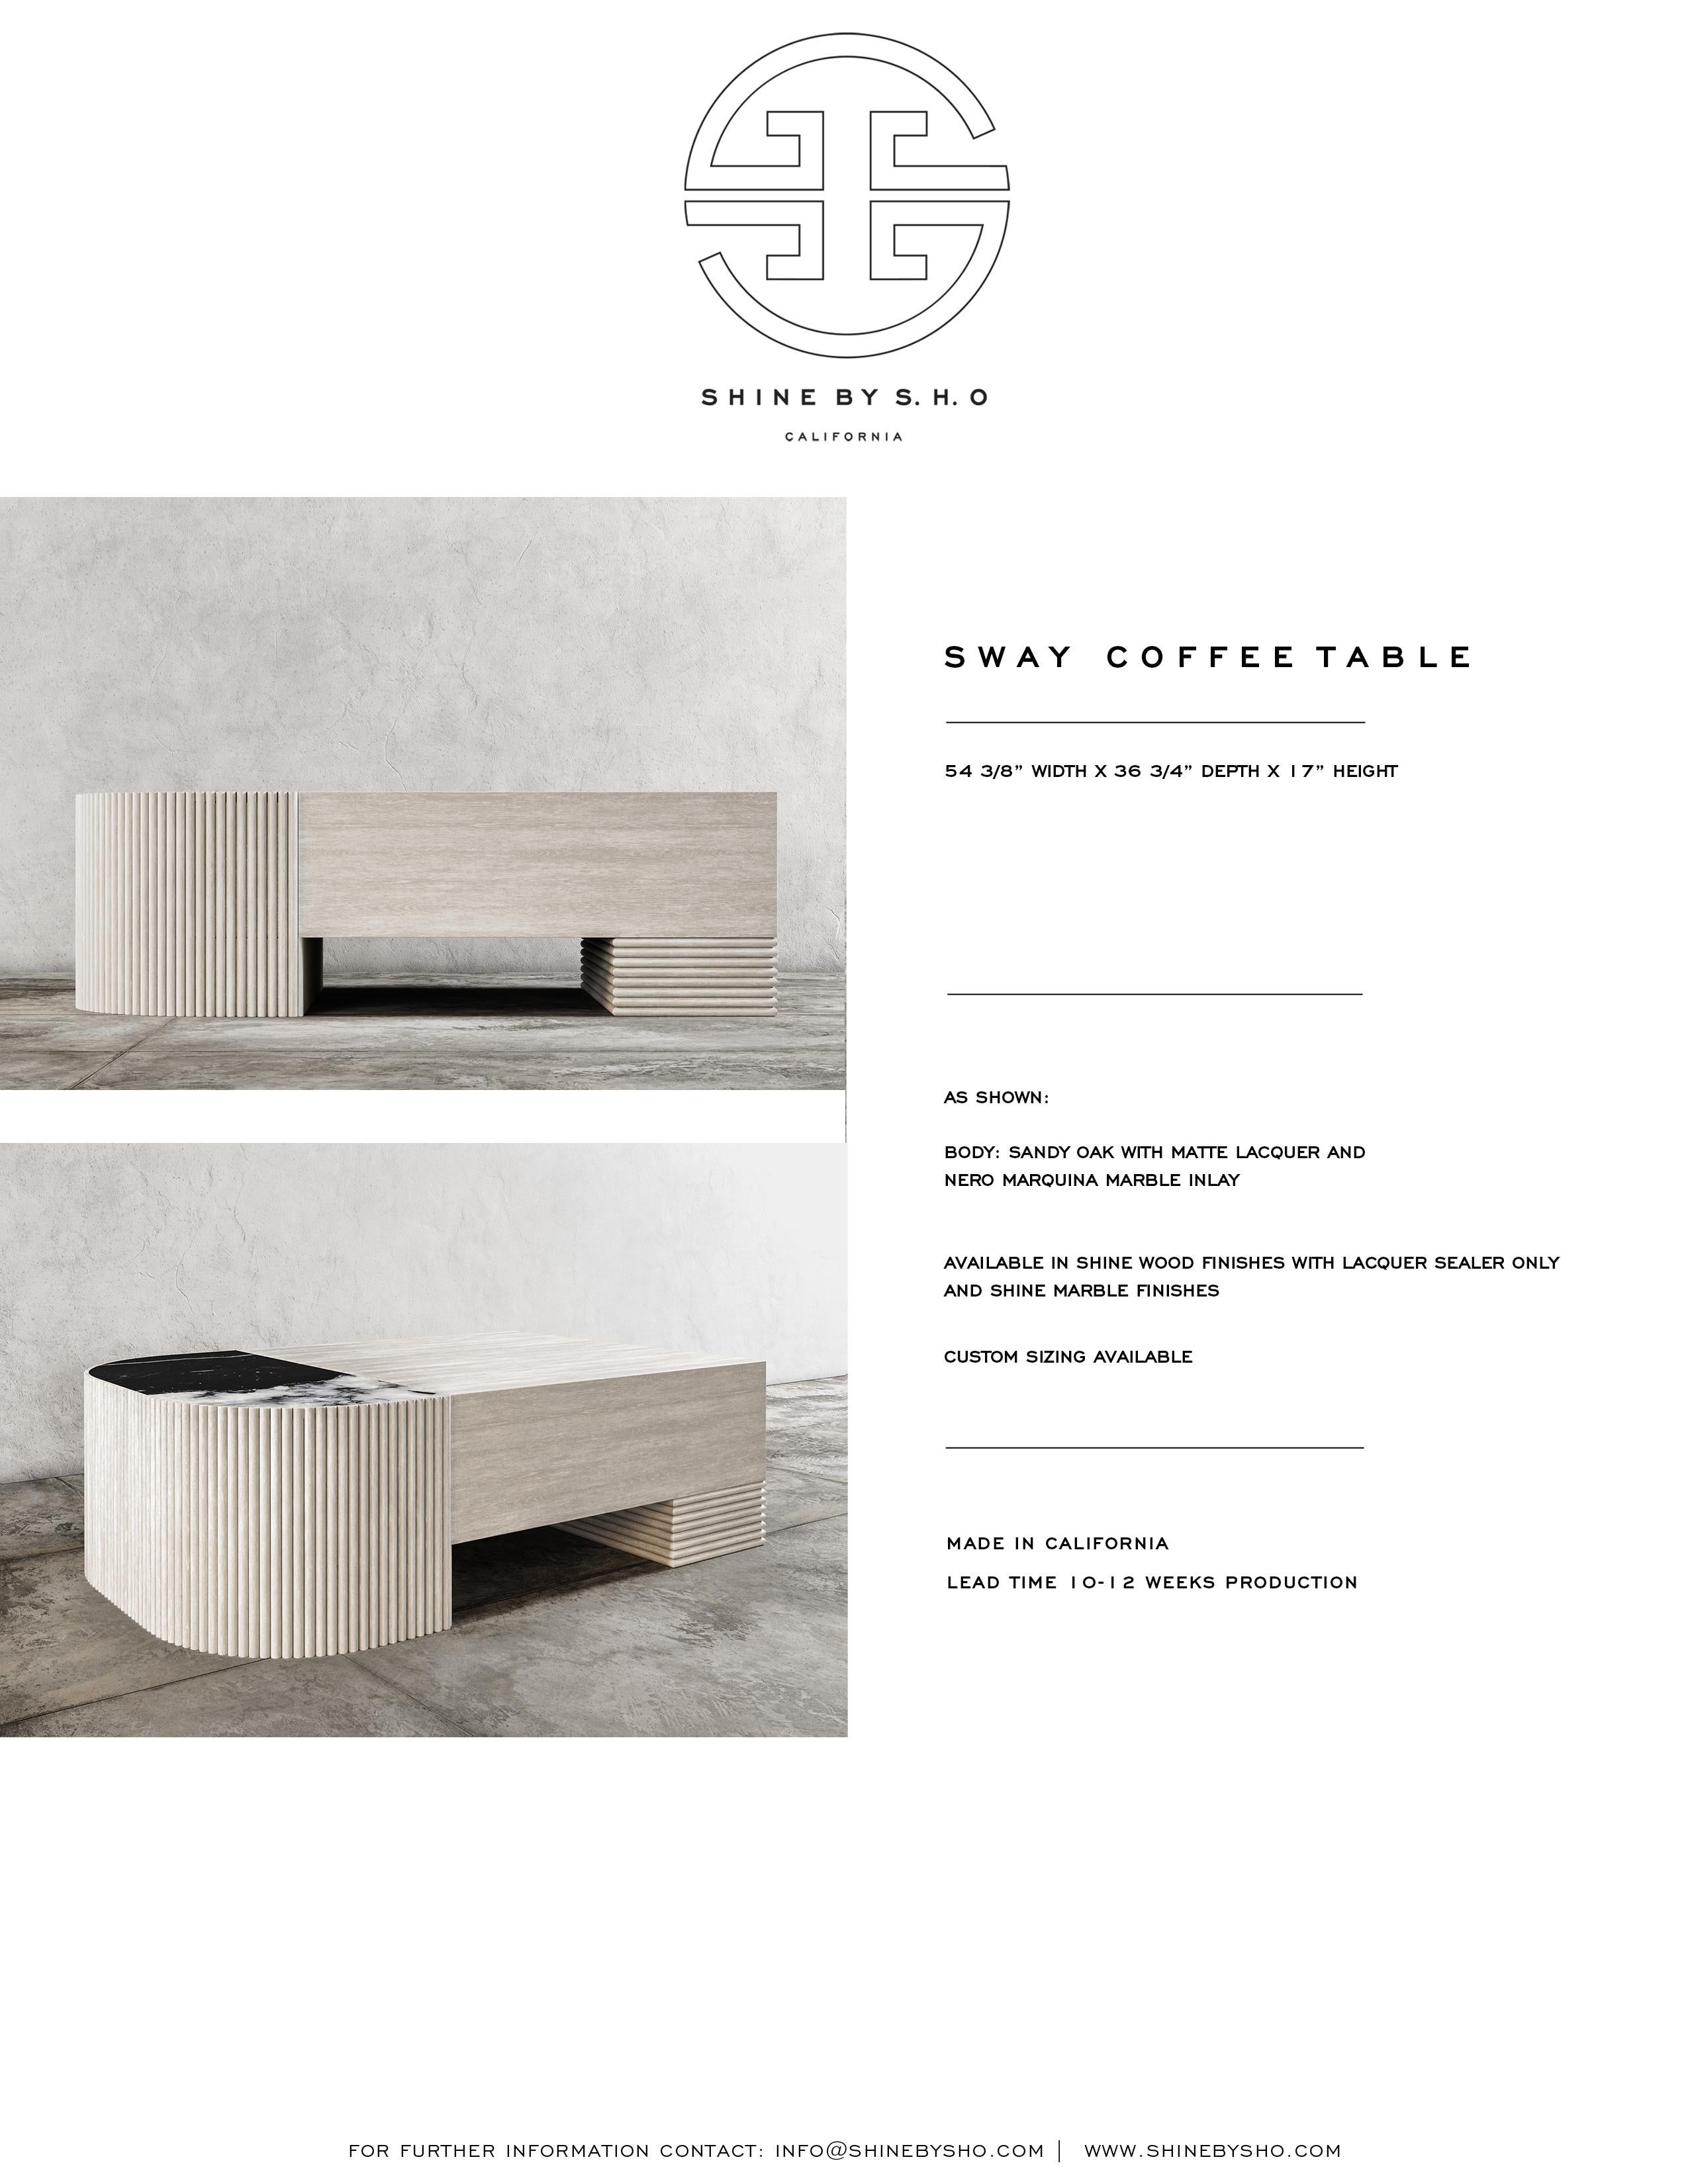 SWAY COFFEE TABLE - Modern Design with Sandy Oak + Nero Marquina Marble For Sale 1